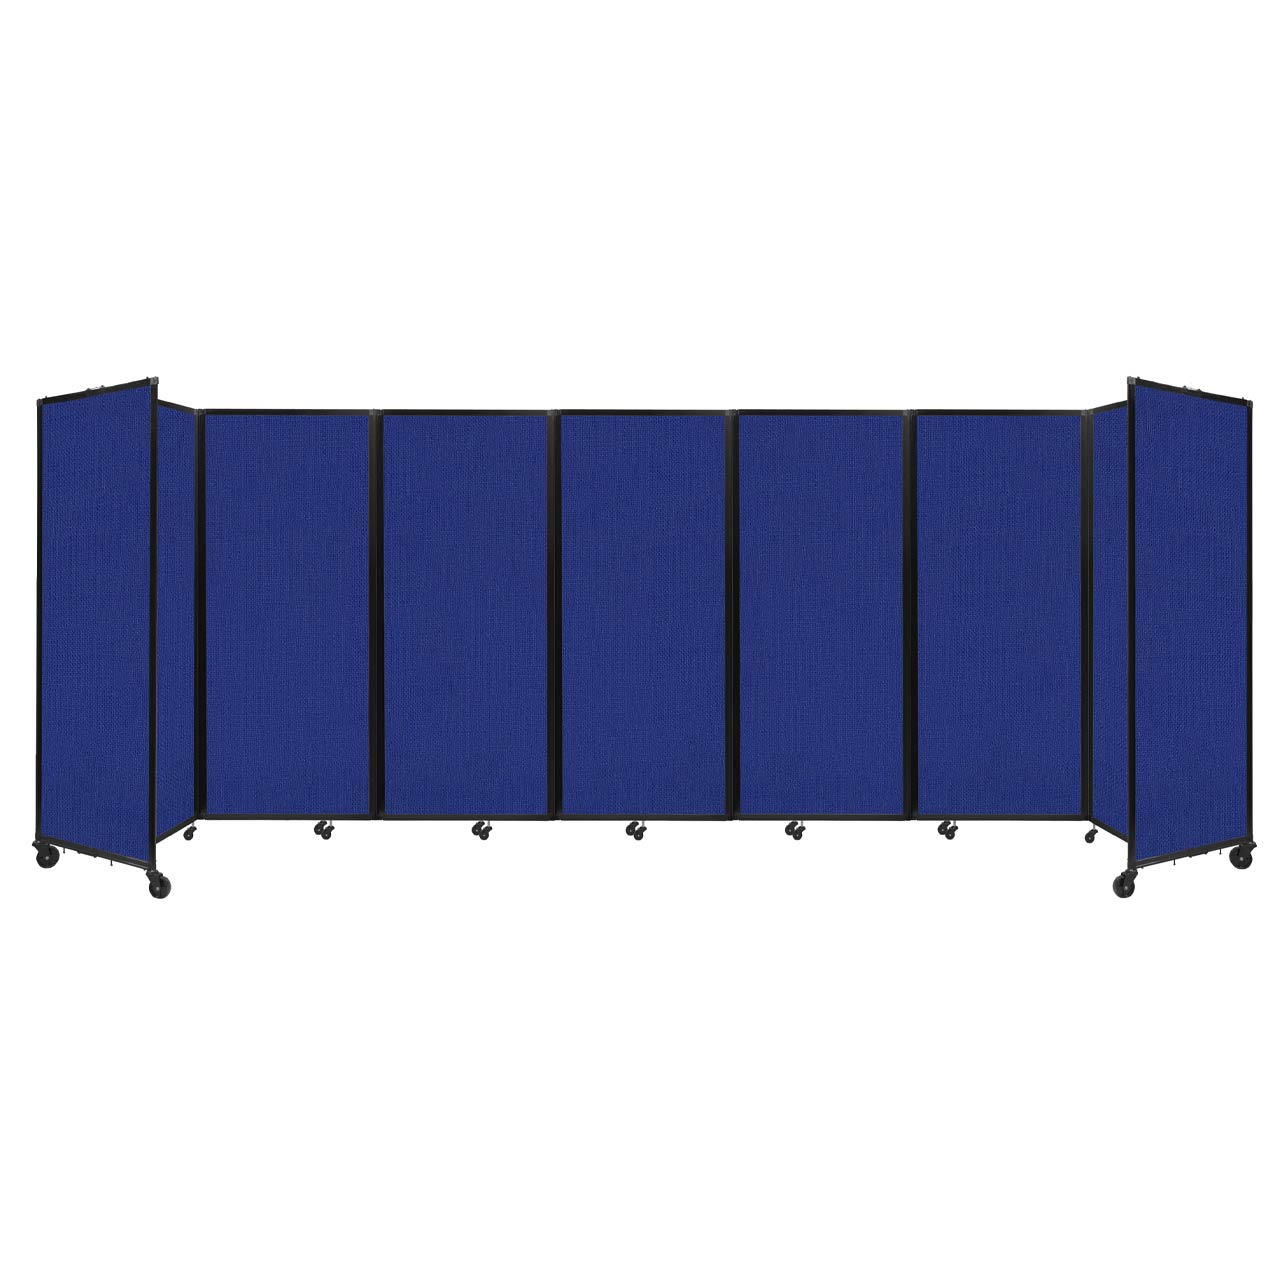 Room Divider 360° Folding Portable Partition with Acoustical Fabric Panels, 19' 6" W x 6' 10" H